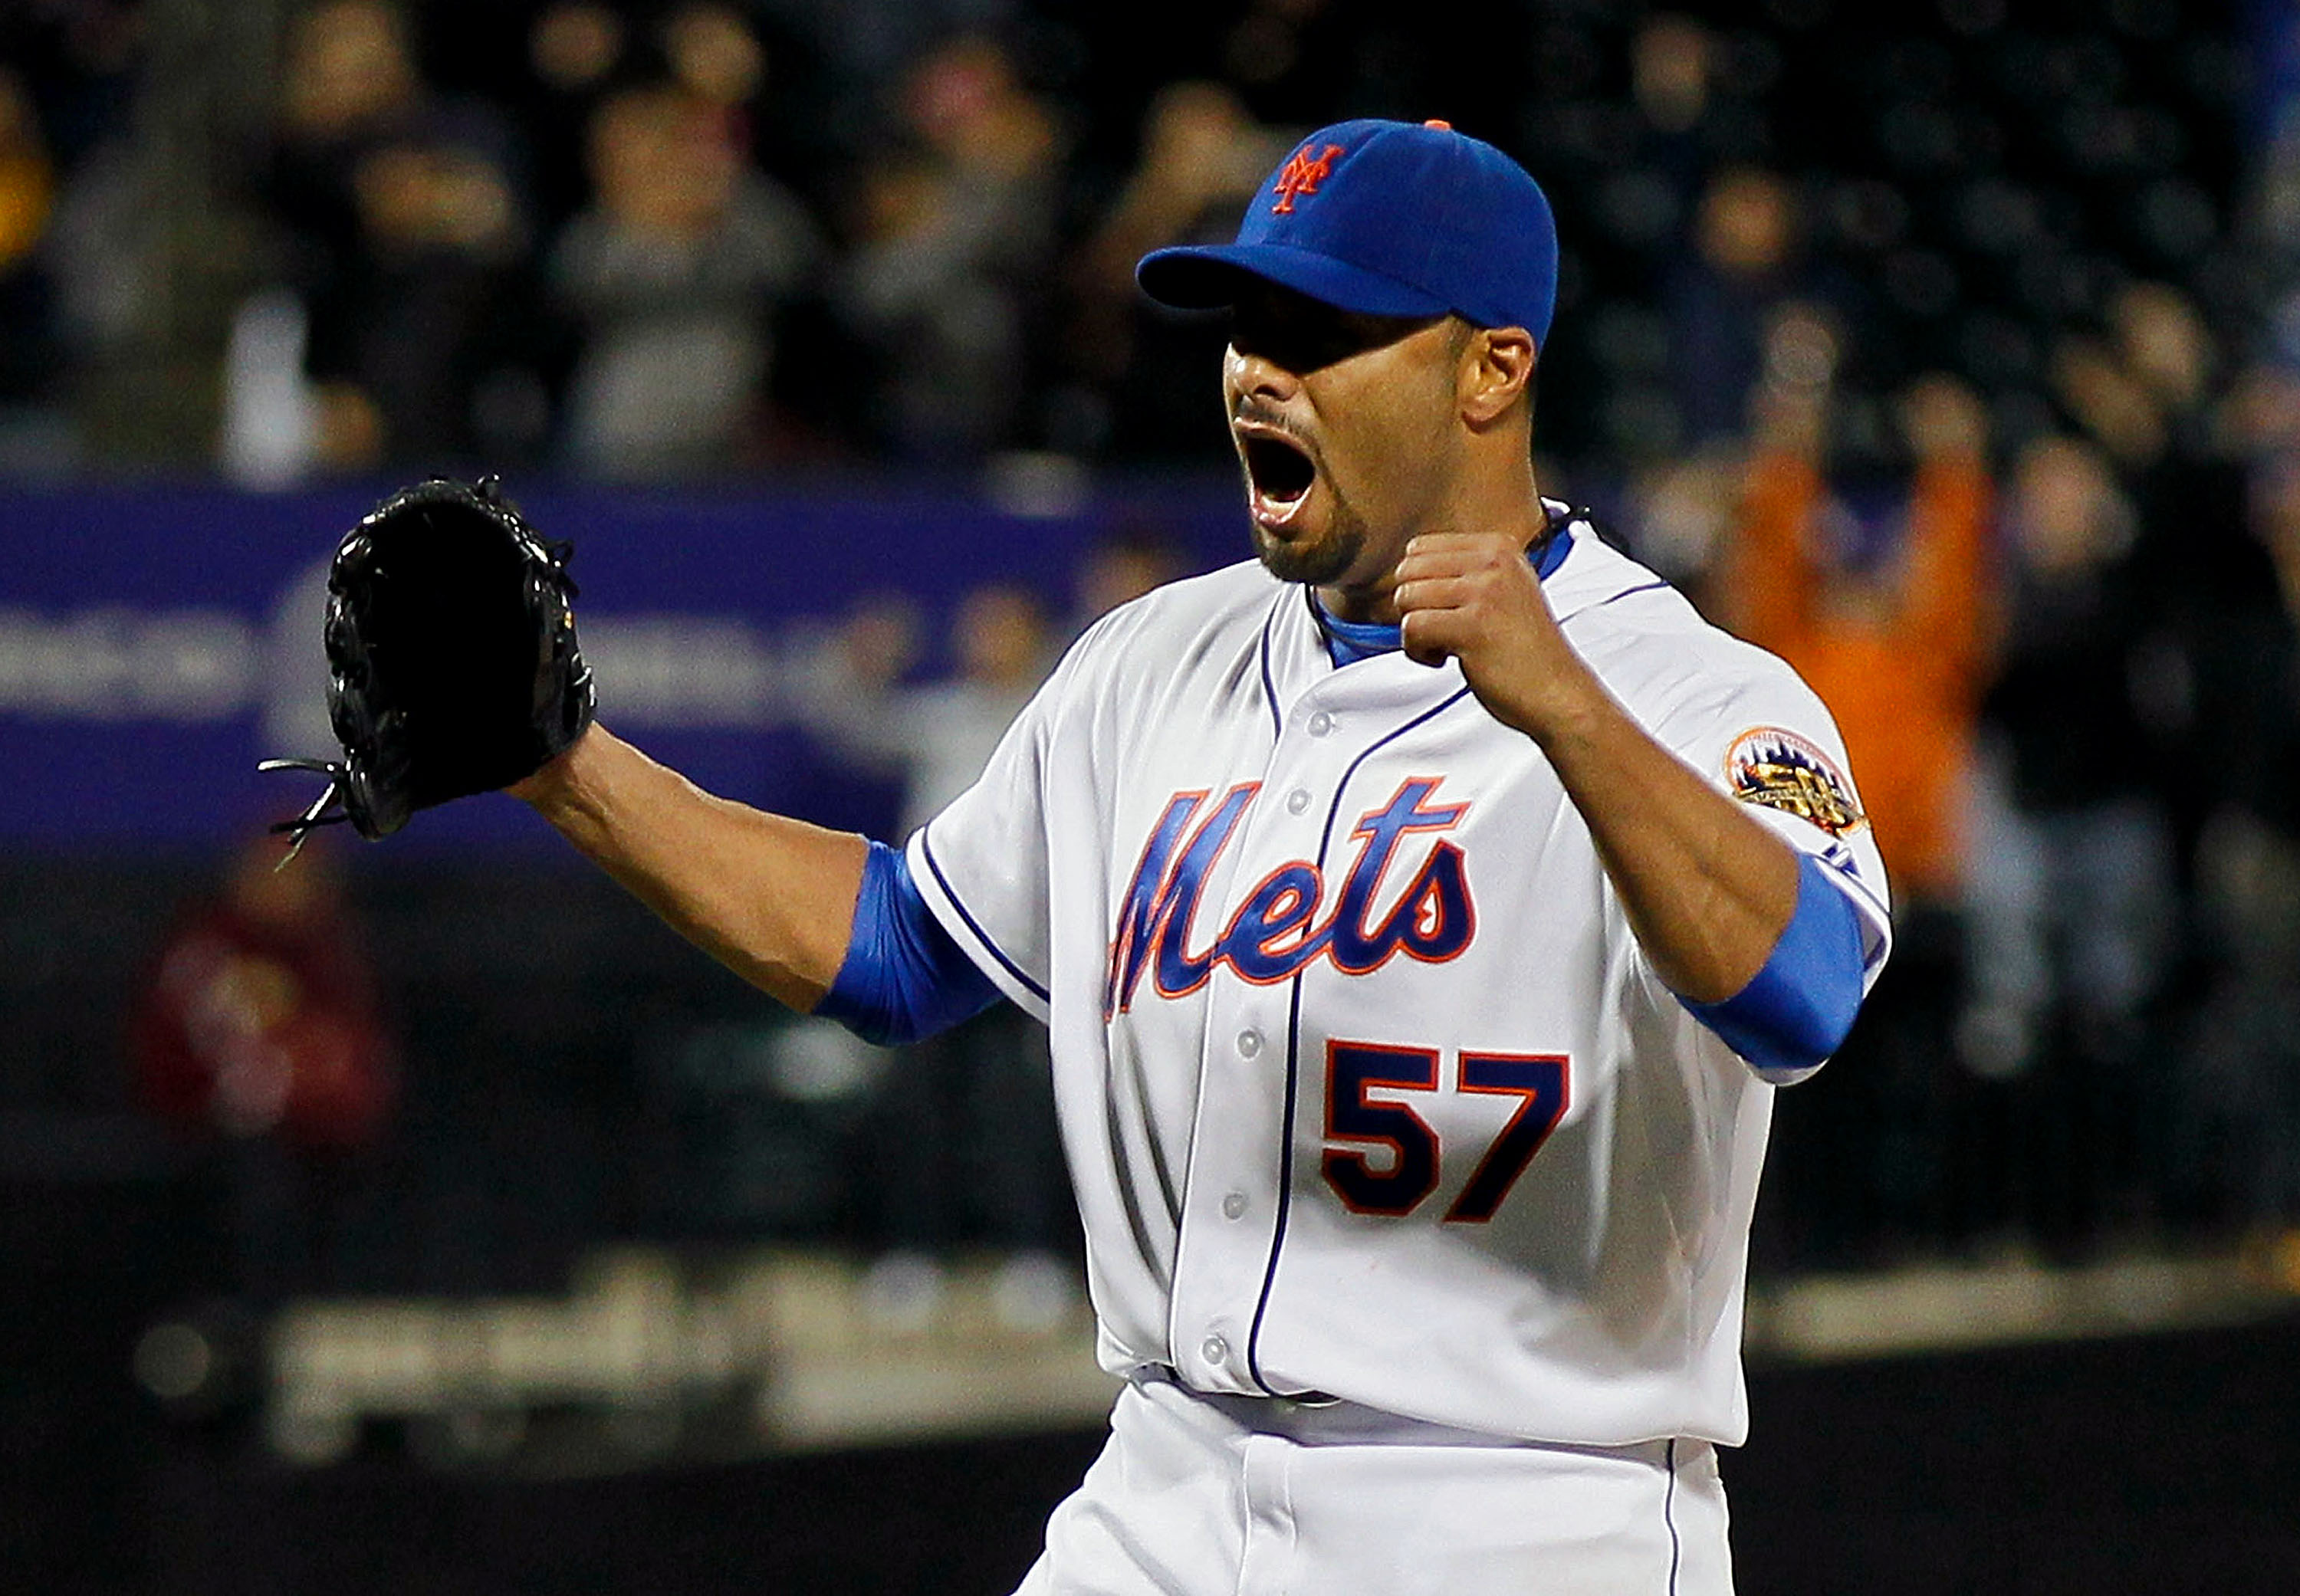 Johan Santana of the New York Mets celebrates after pitching a no hitter against the St. Louis Cardinals at Citi Field on June 1, 2012 in New York City.